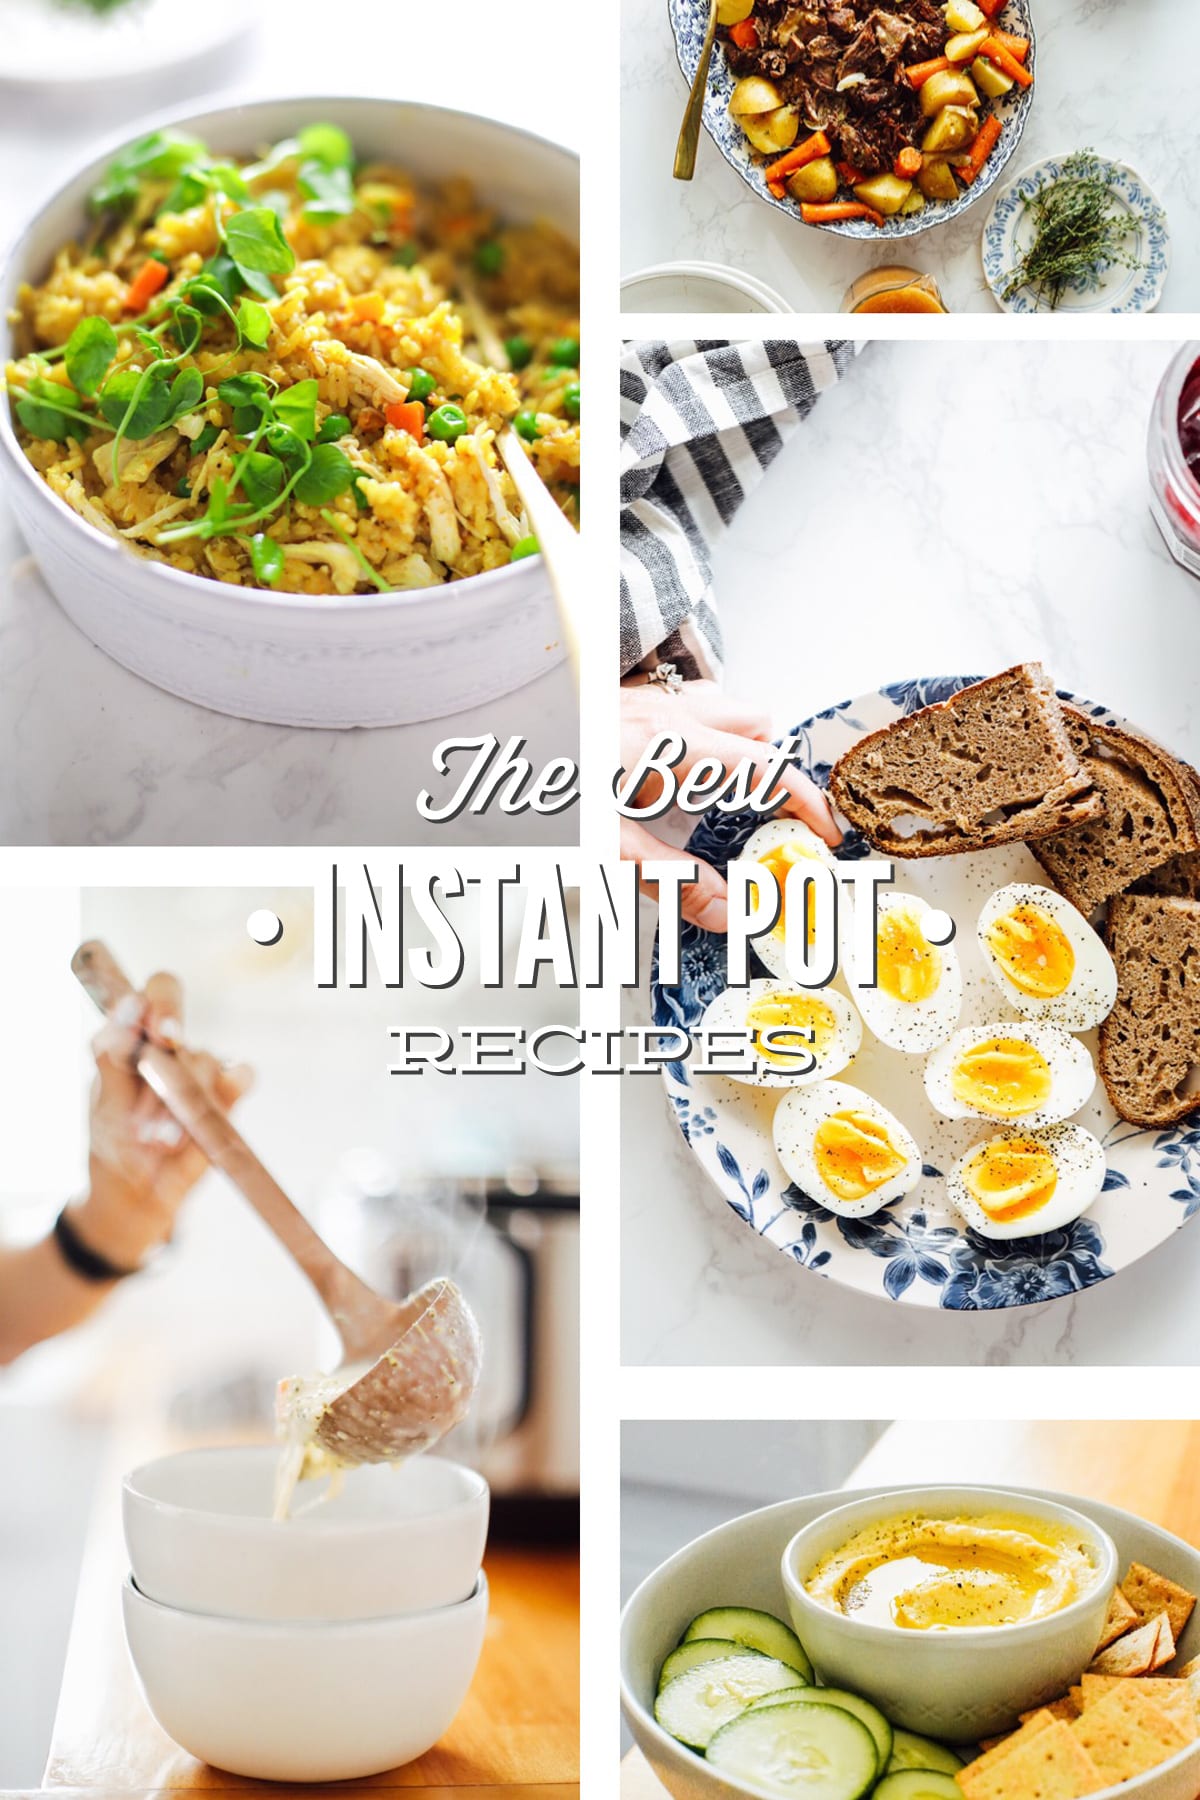 The Best Instant Pot Recipes (Healthy, Real Food)